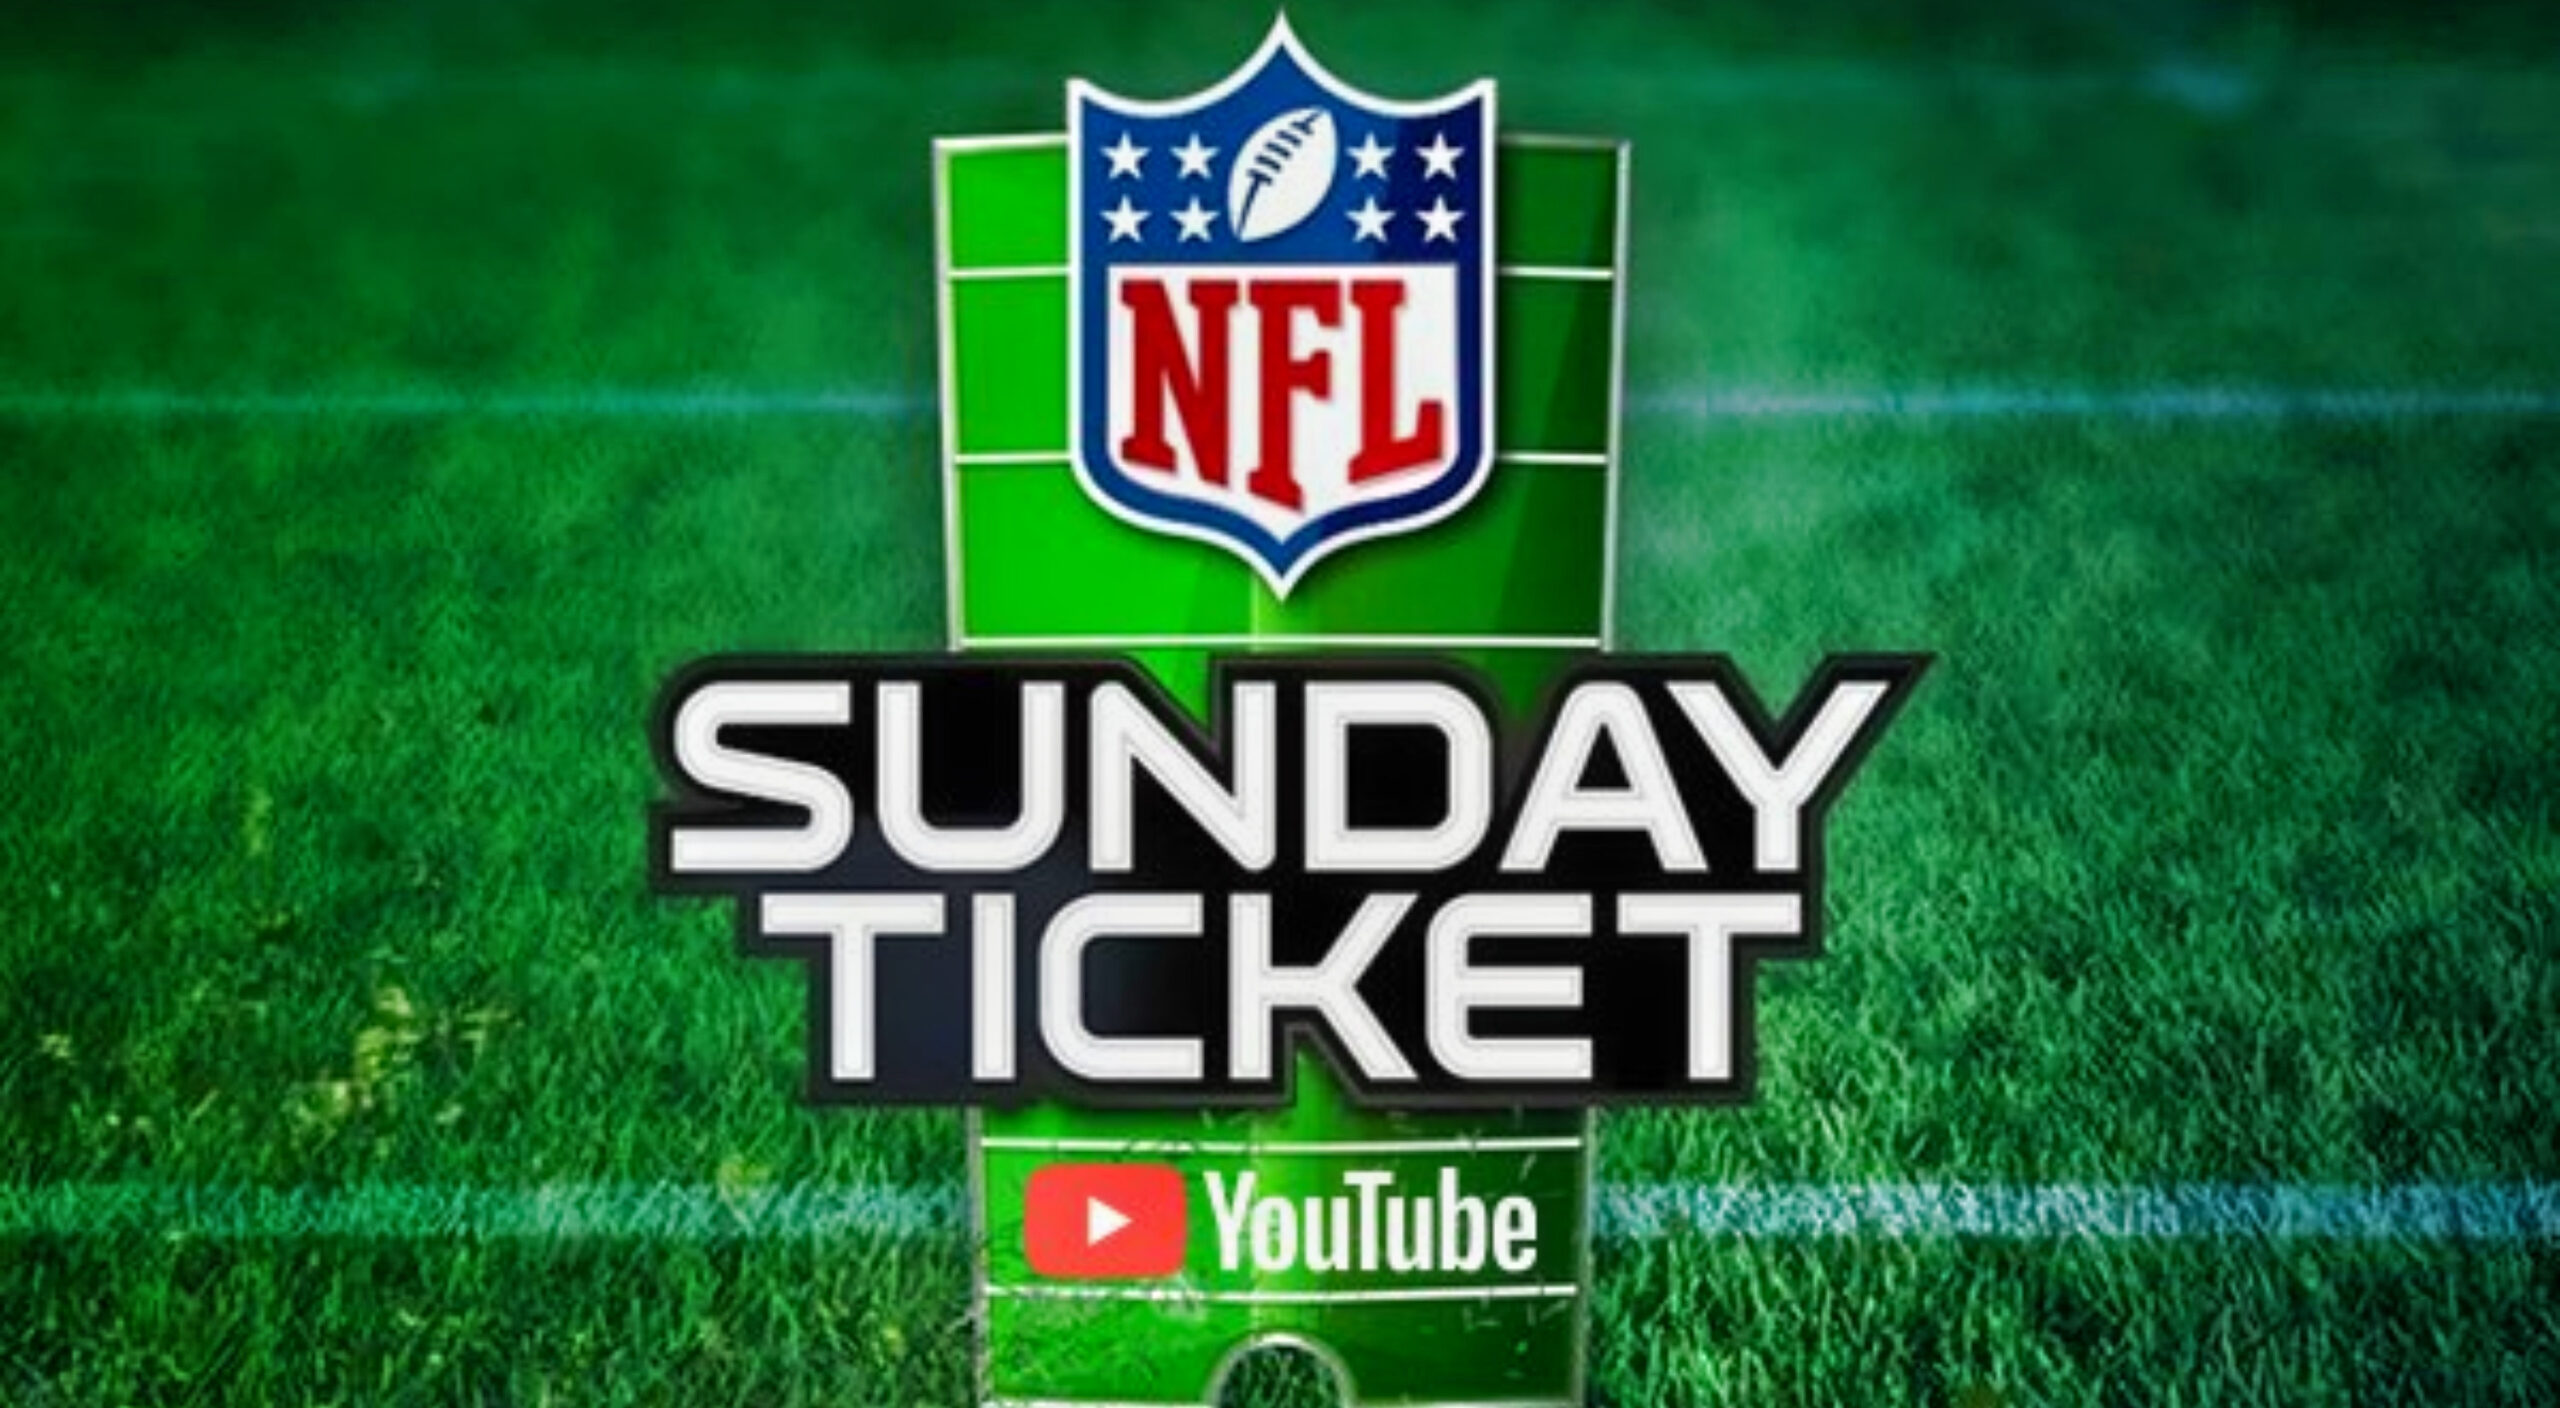 YouTube Reveals NFL Sunday Ticket 'Student Plan' Pricing